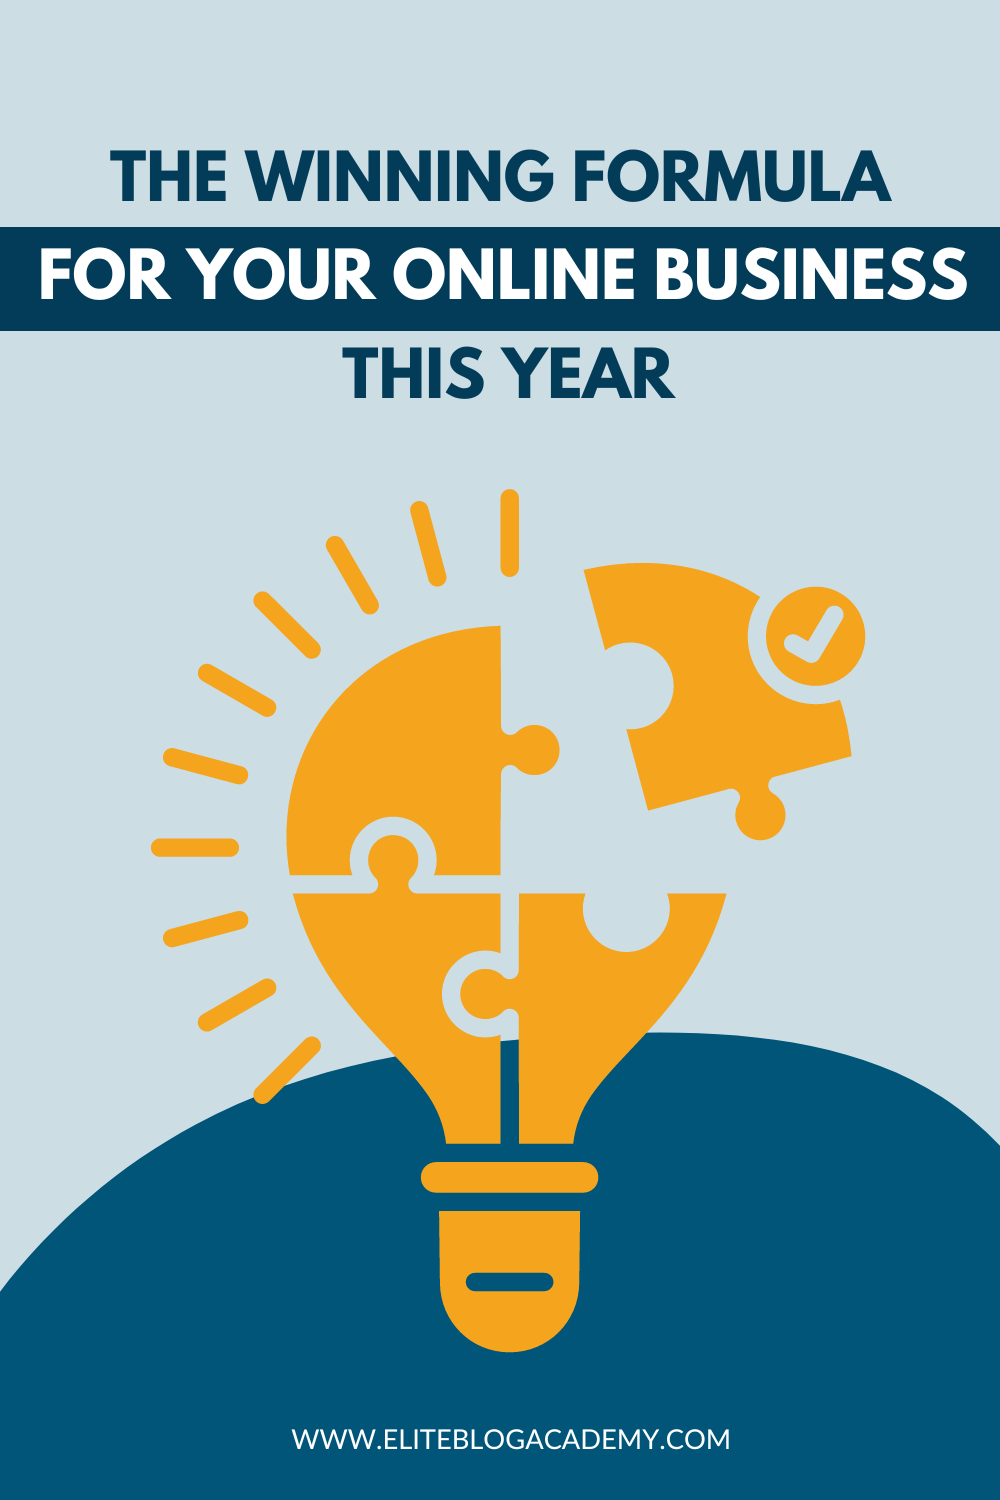 The Winning Formula for Your Online Business This Year